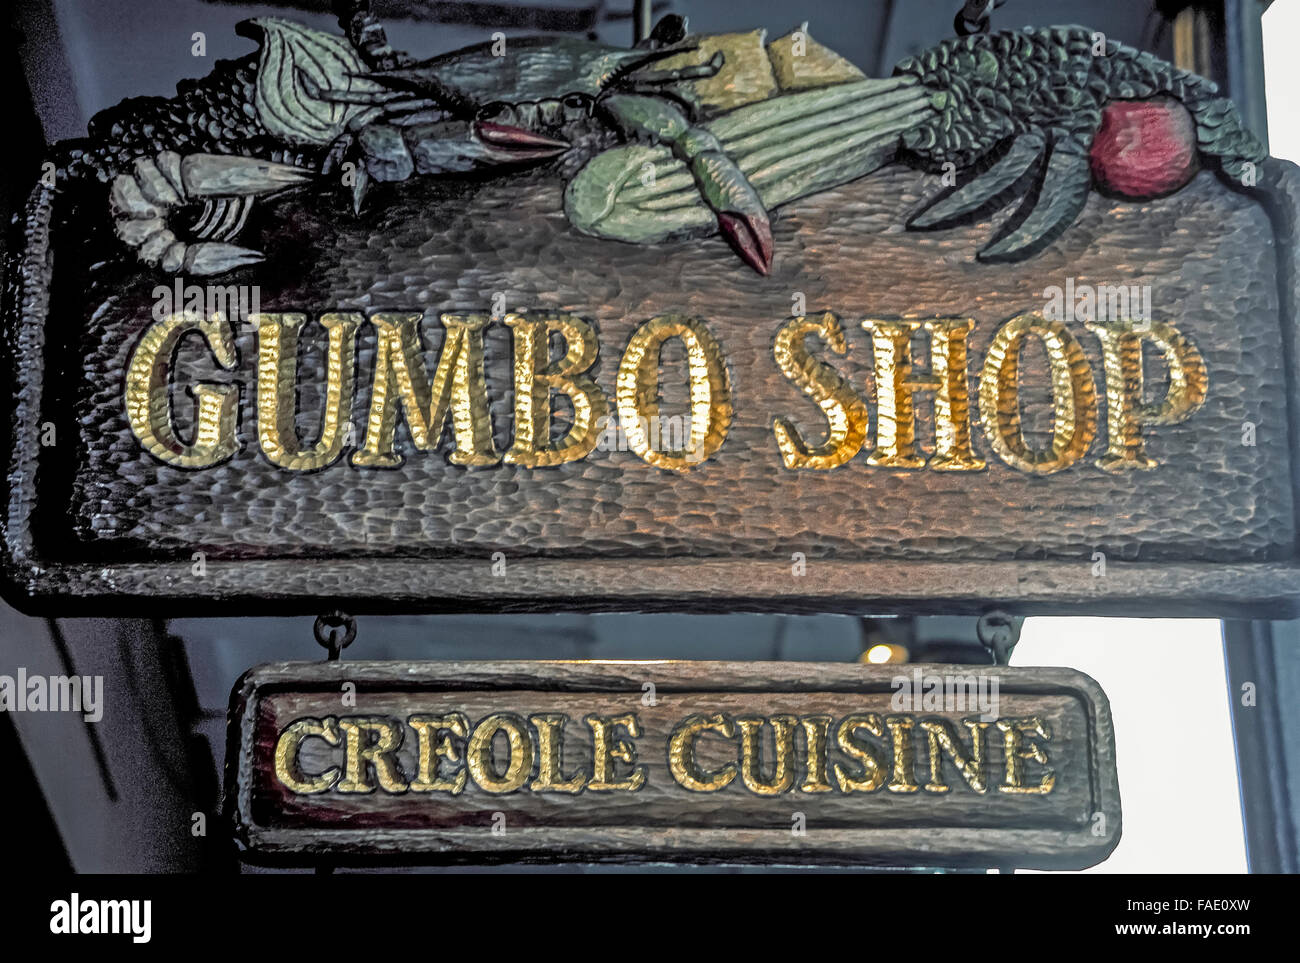 An outdoor street sign advertises the Gumbo Shop, a casual French Quarter restaurant specializing in Creole cuisine in New Orleans, Louisiana, USA. A favorite dish on the menu is its namesake okra-based soup, gumbo, featuring a choice of main ingredients: shrimp and crabs or chicken and Andouille, a Cajun sausage. The delicious soup also includes onion, bell peppers, celery, tomato and seasonings. Stock Photo